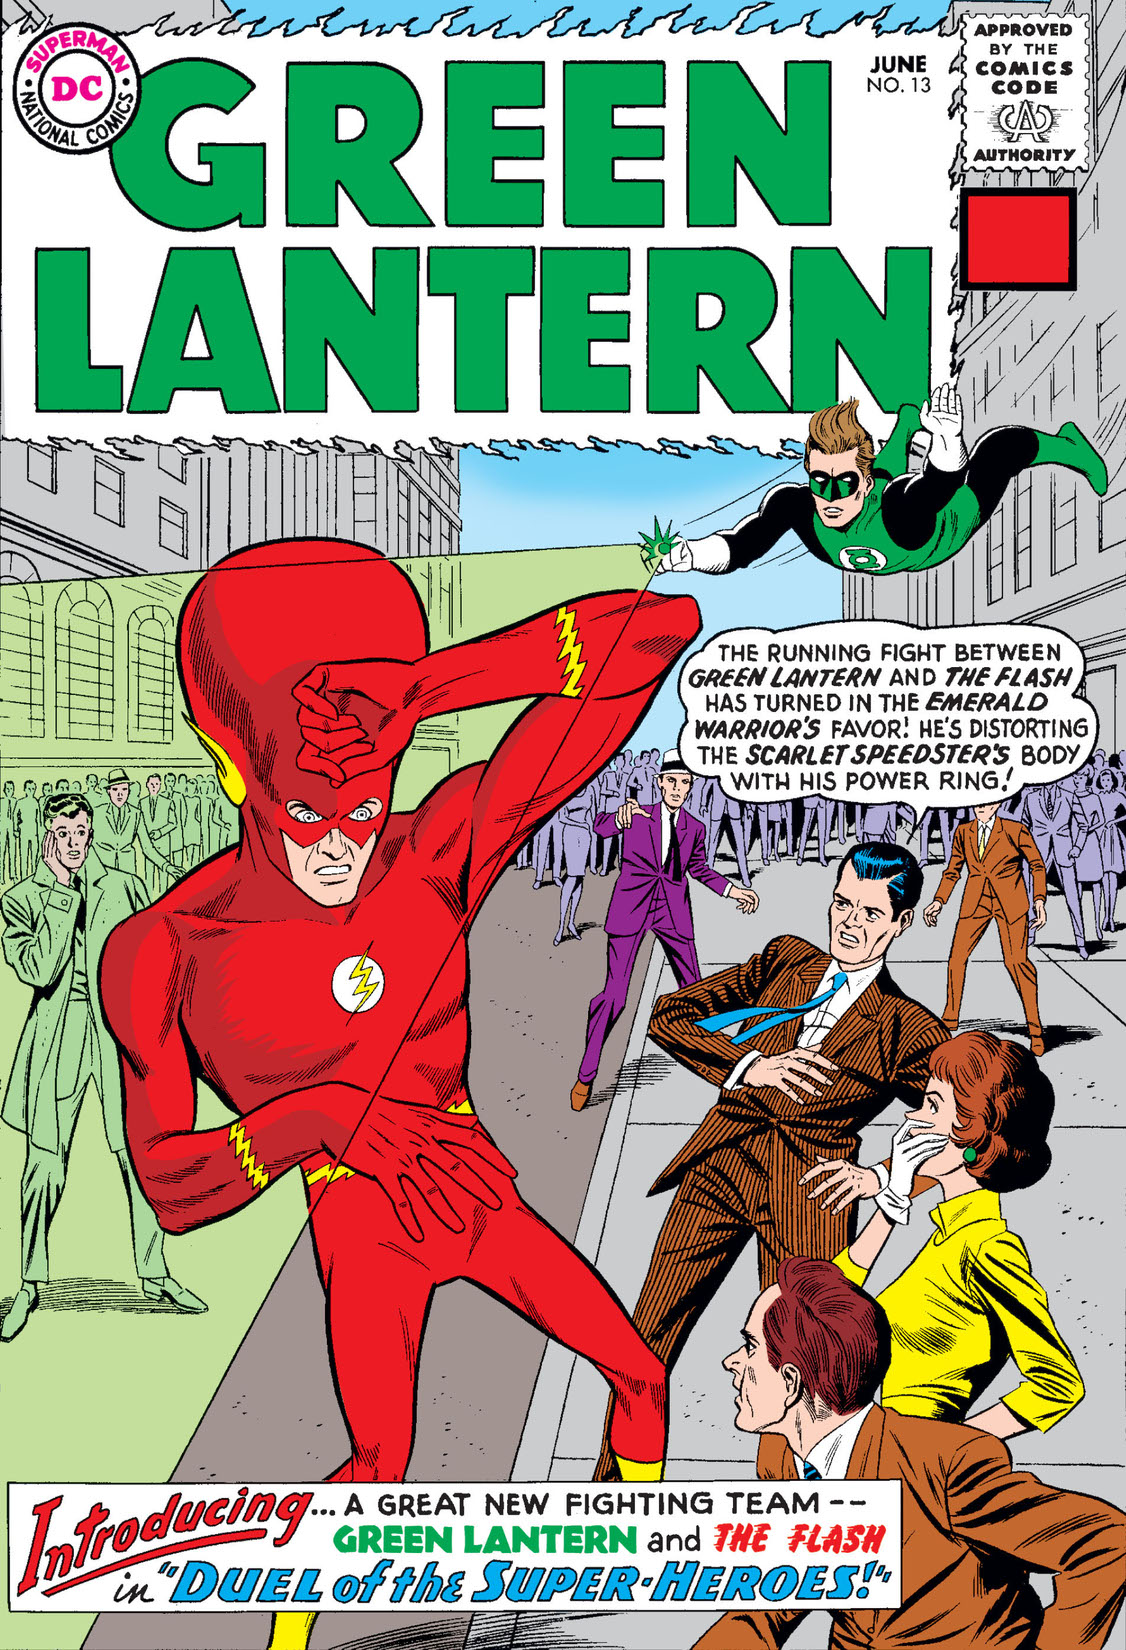 Green Lantern (1960-) #13 preview images